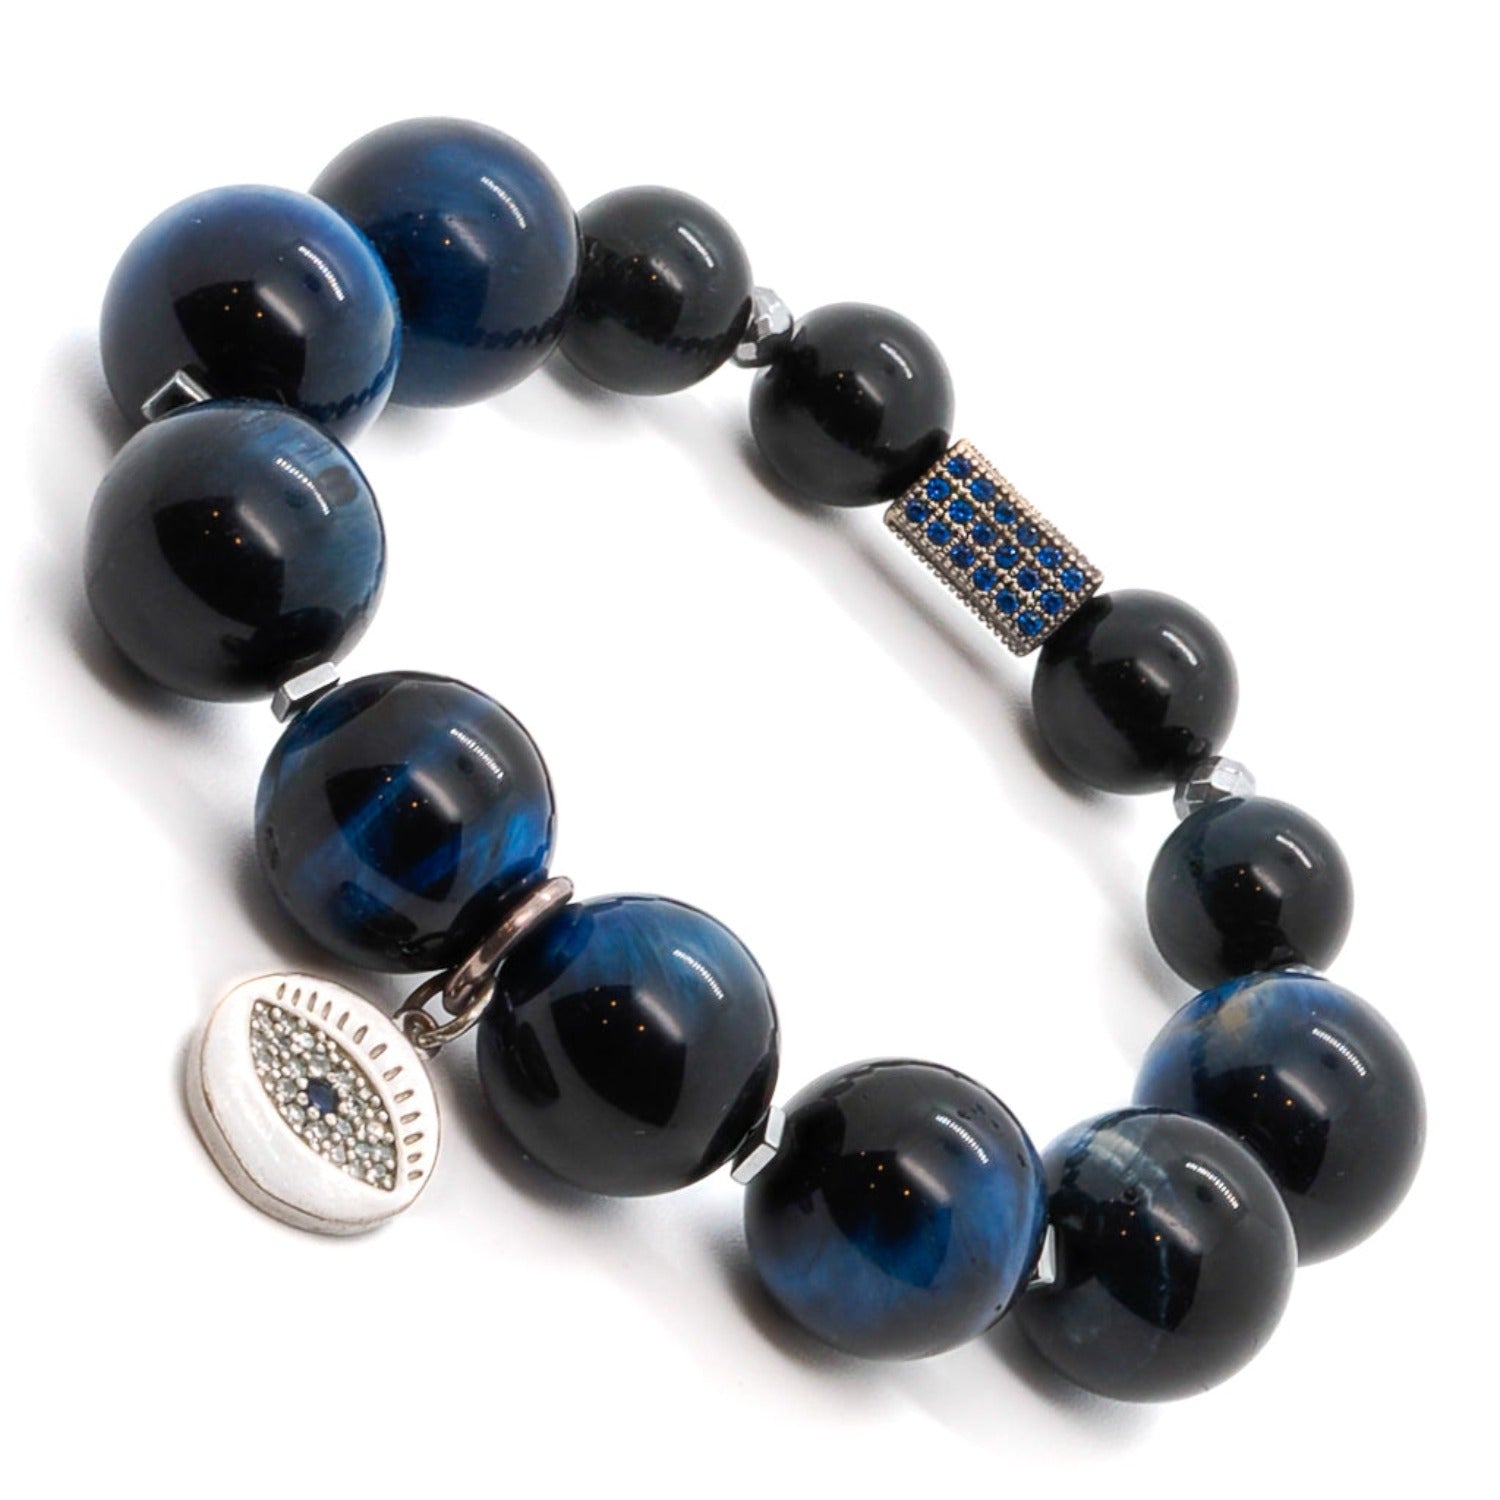 Make a bold statement with the Power Of Eye Bracelet, a unique accessory crafted with Blue Tiger's Eye stone beads and a zircon-adorned evil eye charm.